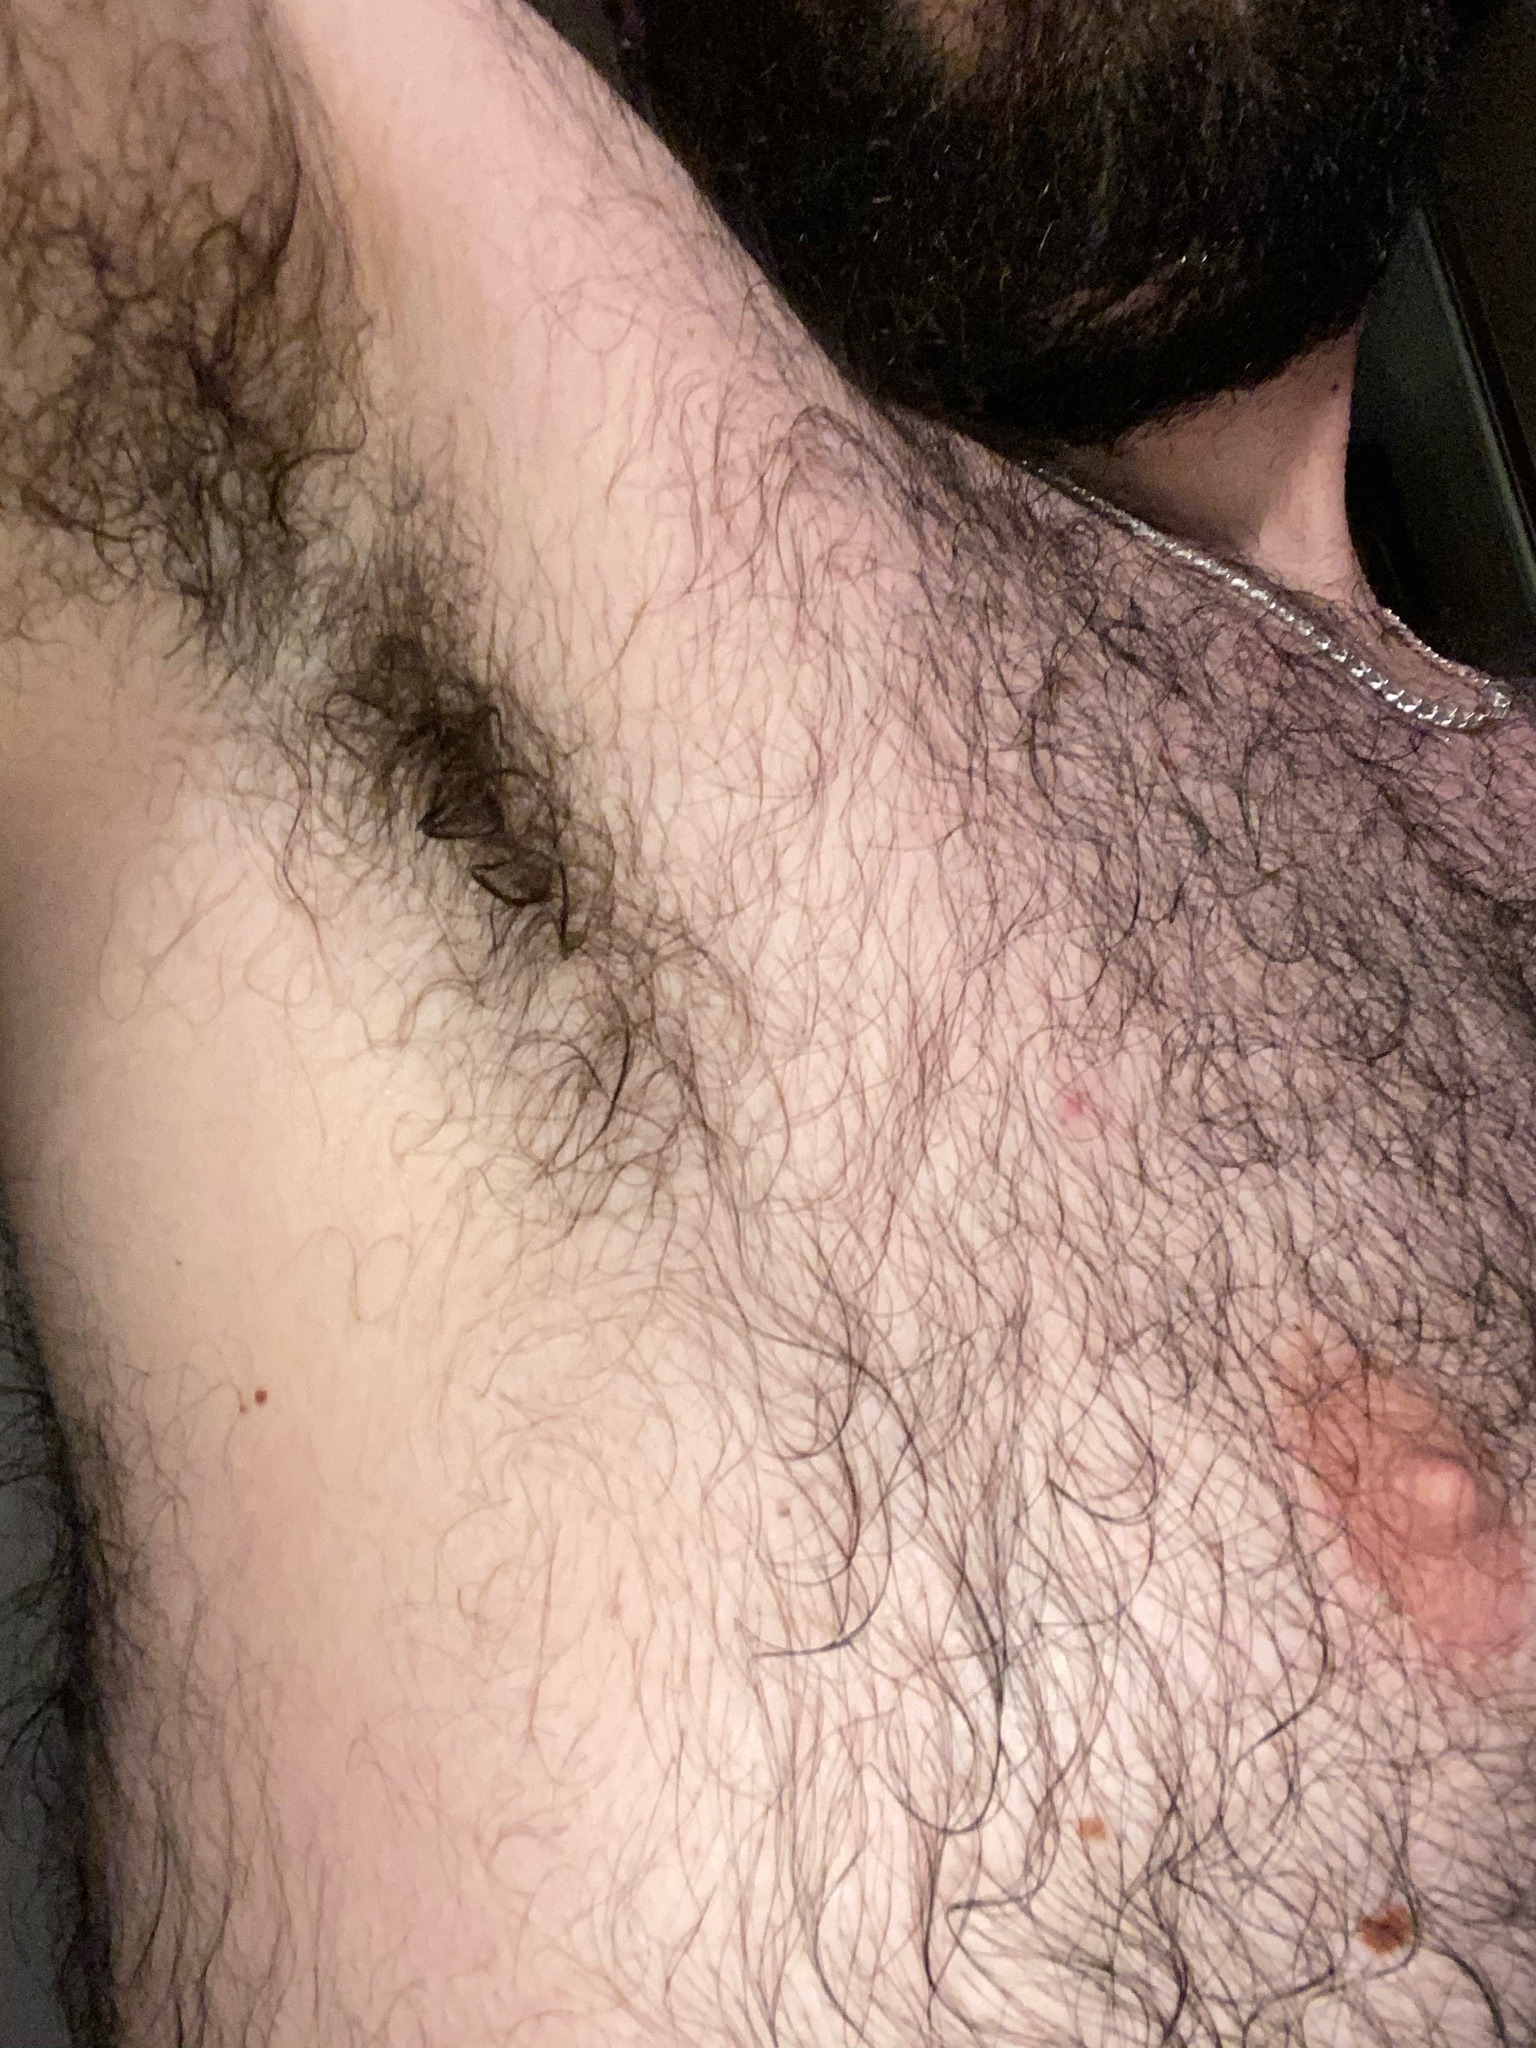 Hairy pits after a shower 